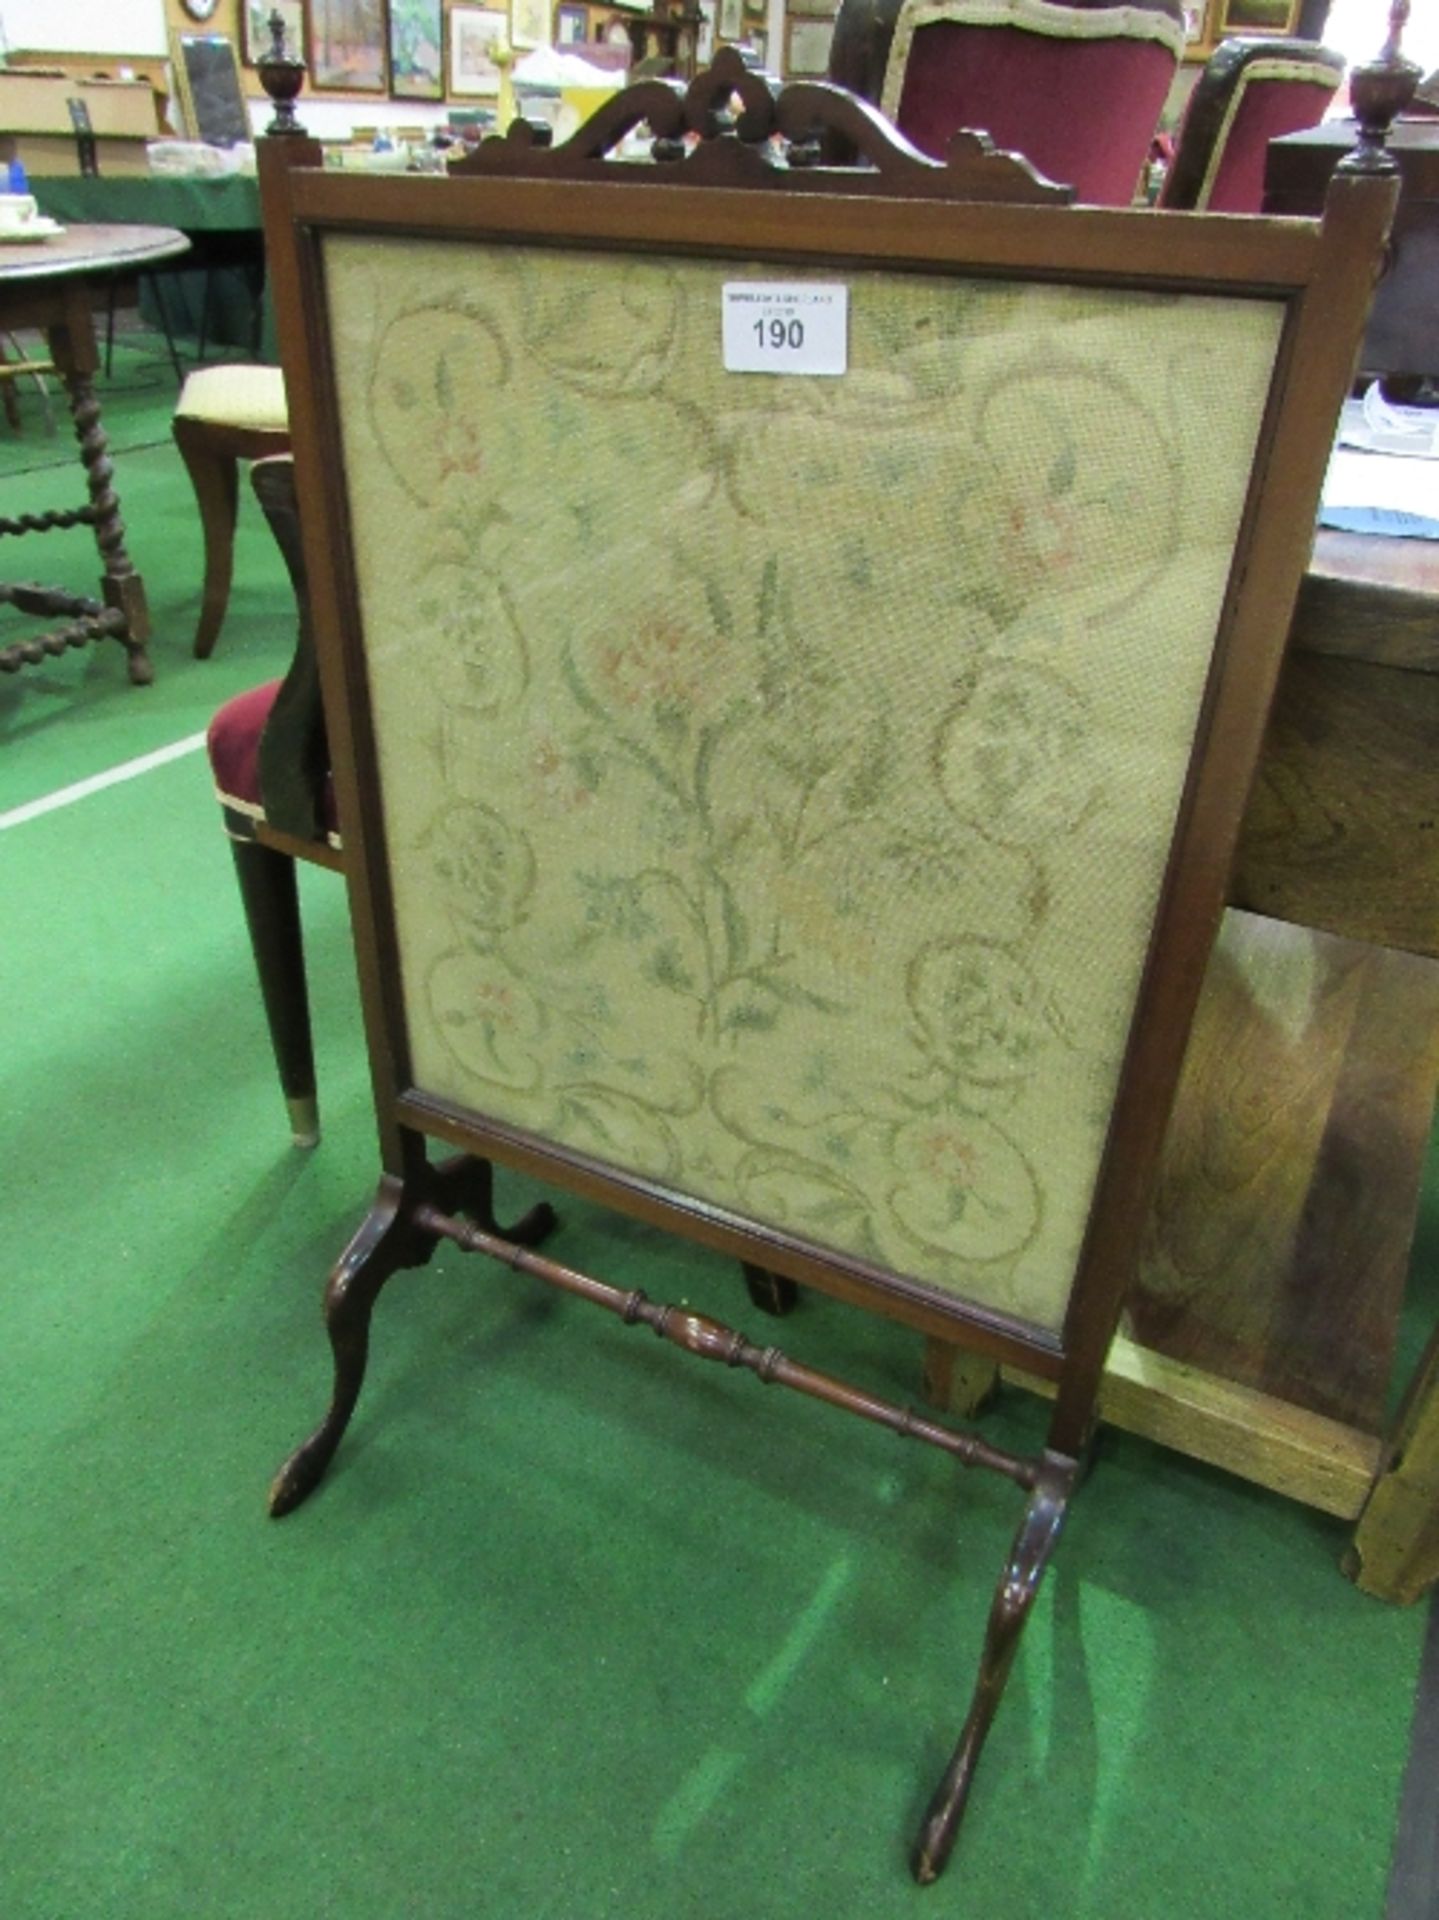 Mahogany tapestry fire screen, 58cms width x 98cms height. Estimate £20-30.